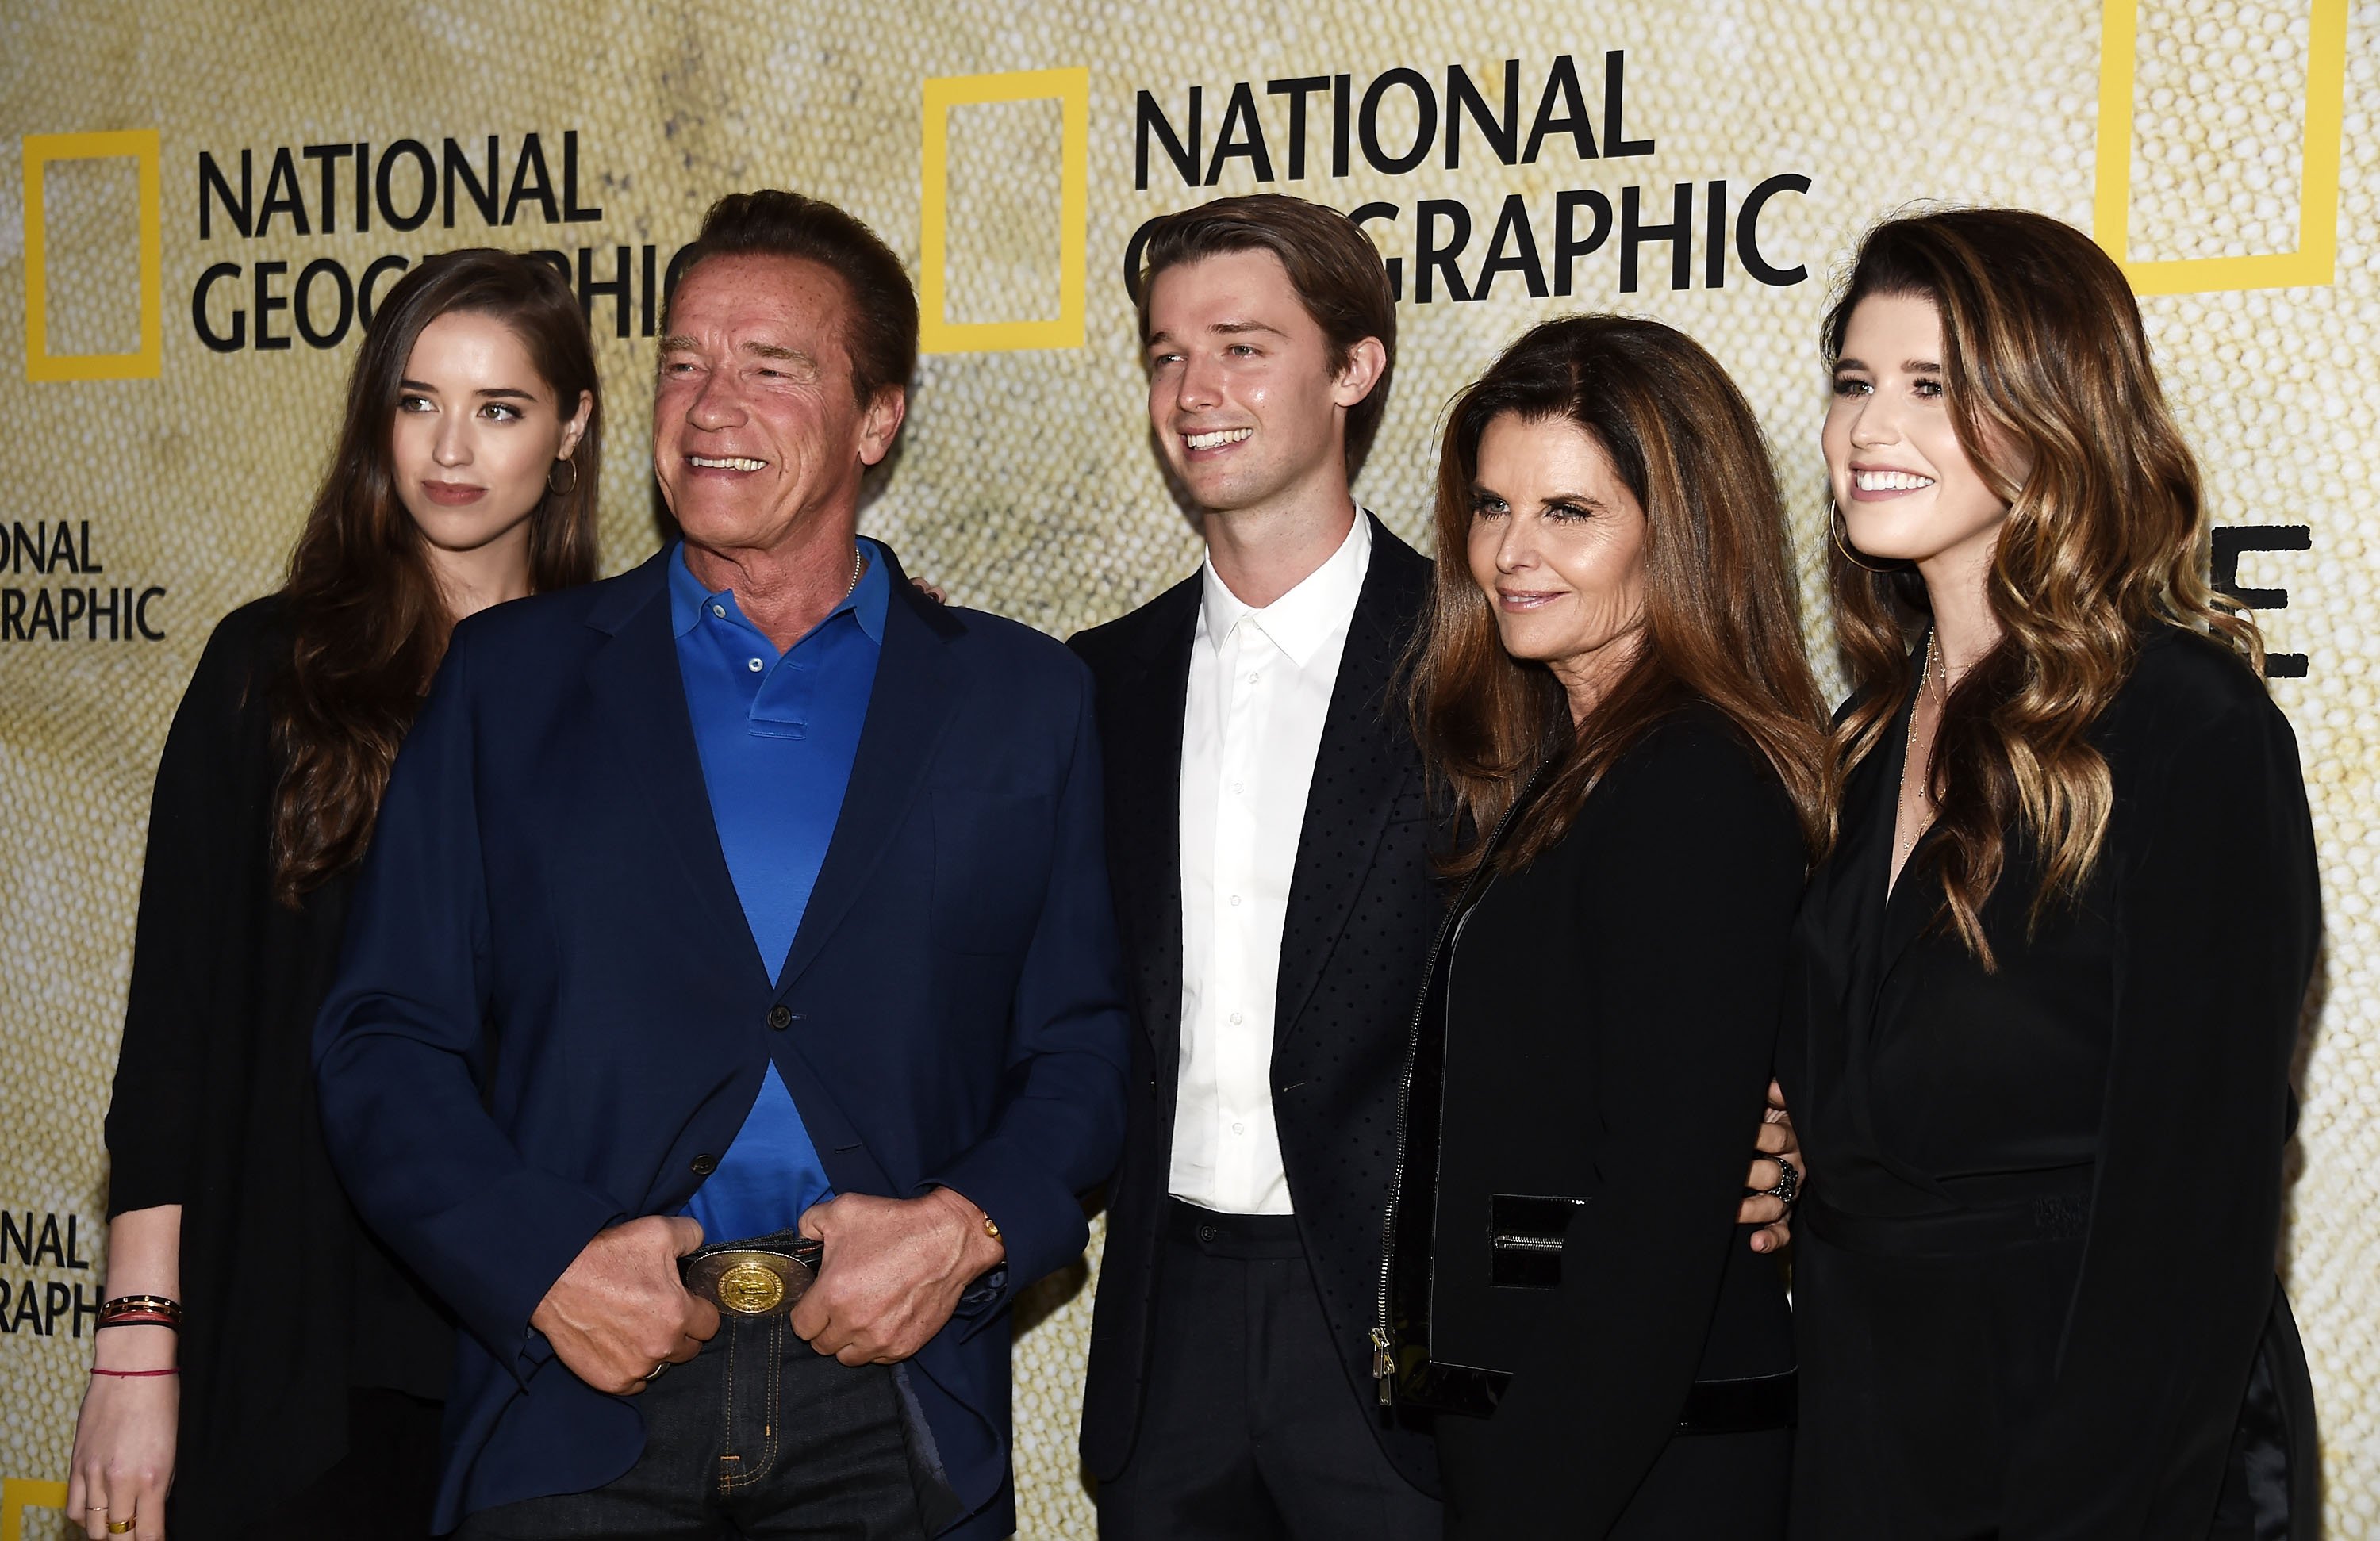 Christina Schwarzenegger, Arnold Schwarzenegger, Patrick Schwarzenegger, Maria Shriver, and Katherine Schwarzenegger arrive at the premiere of National Geographic's "The Long Road Home" at Royce Hall on October 30, 2017, in Los Angeles, California. | Source: Getty Images